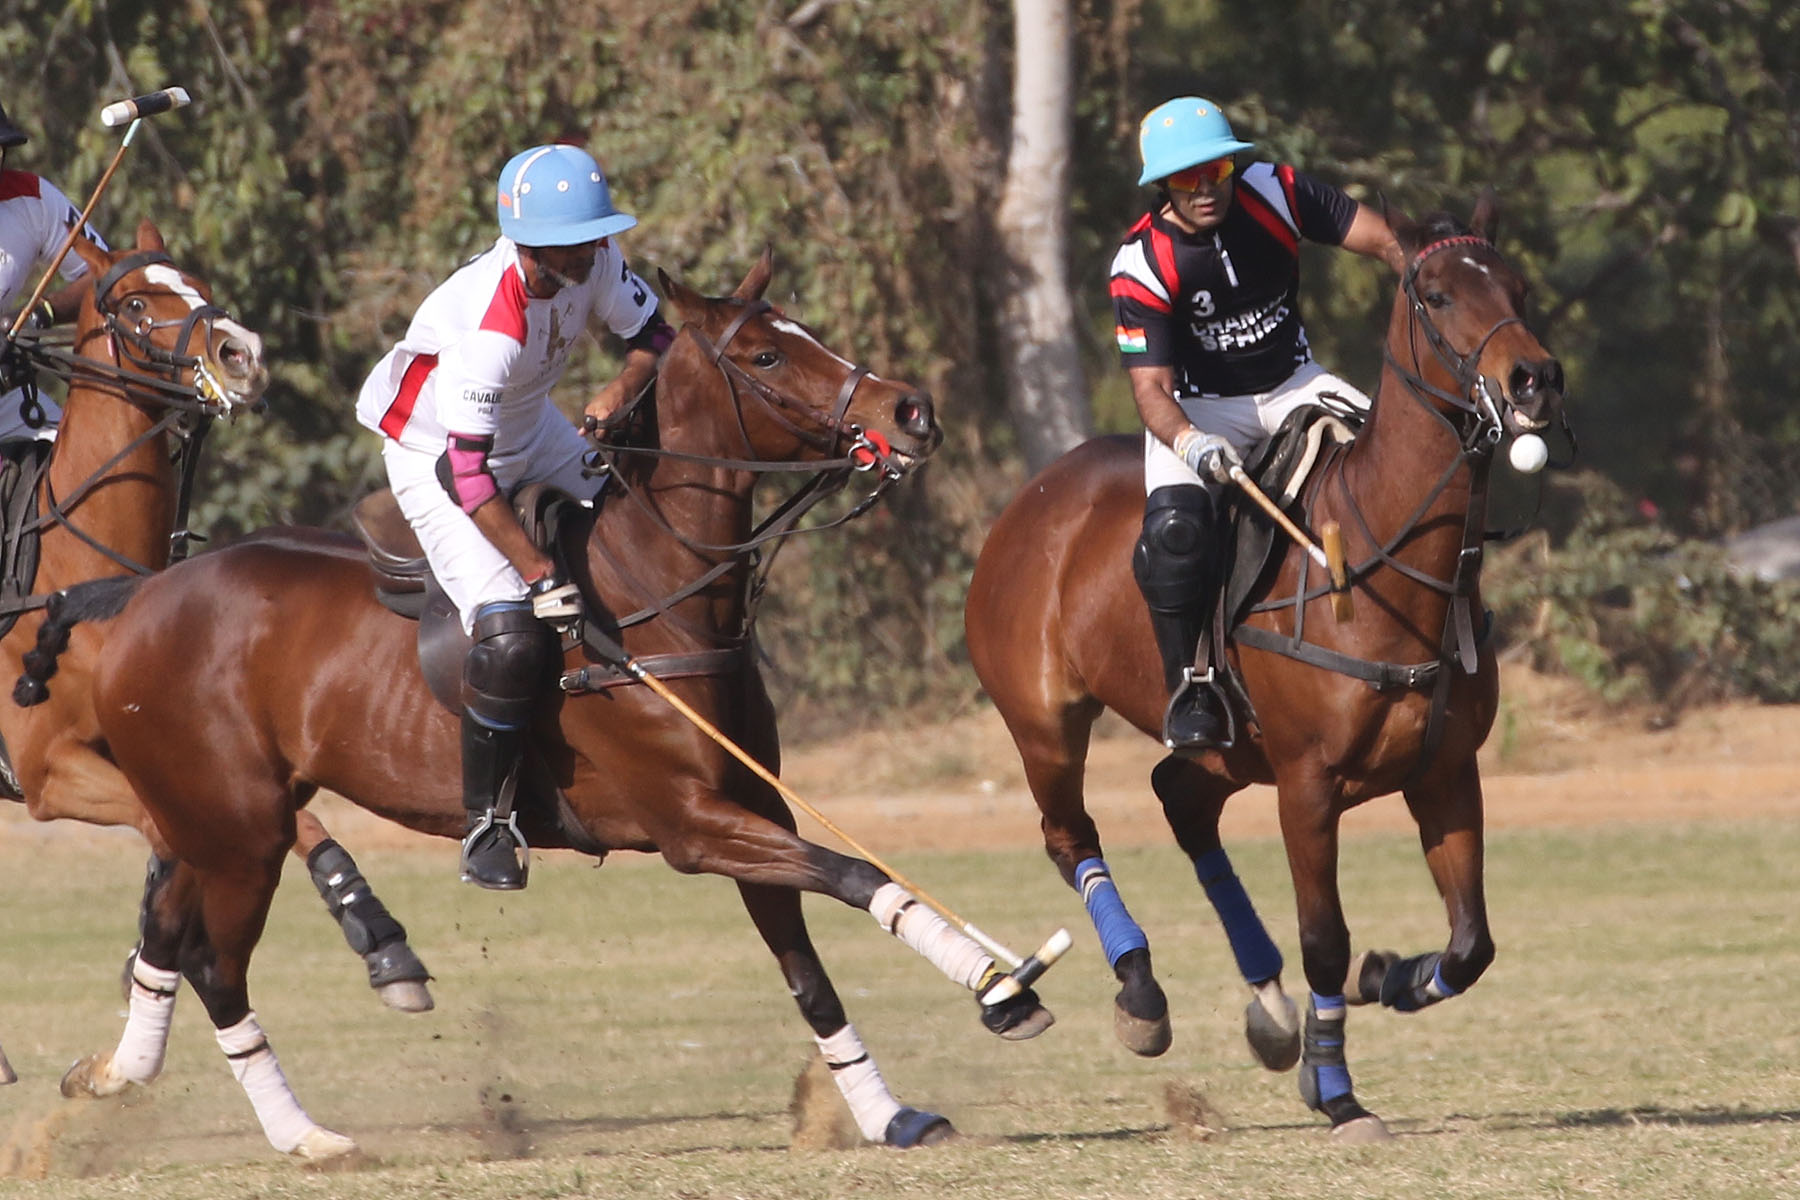 Not only players decide horses in polo, defeat and win